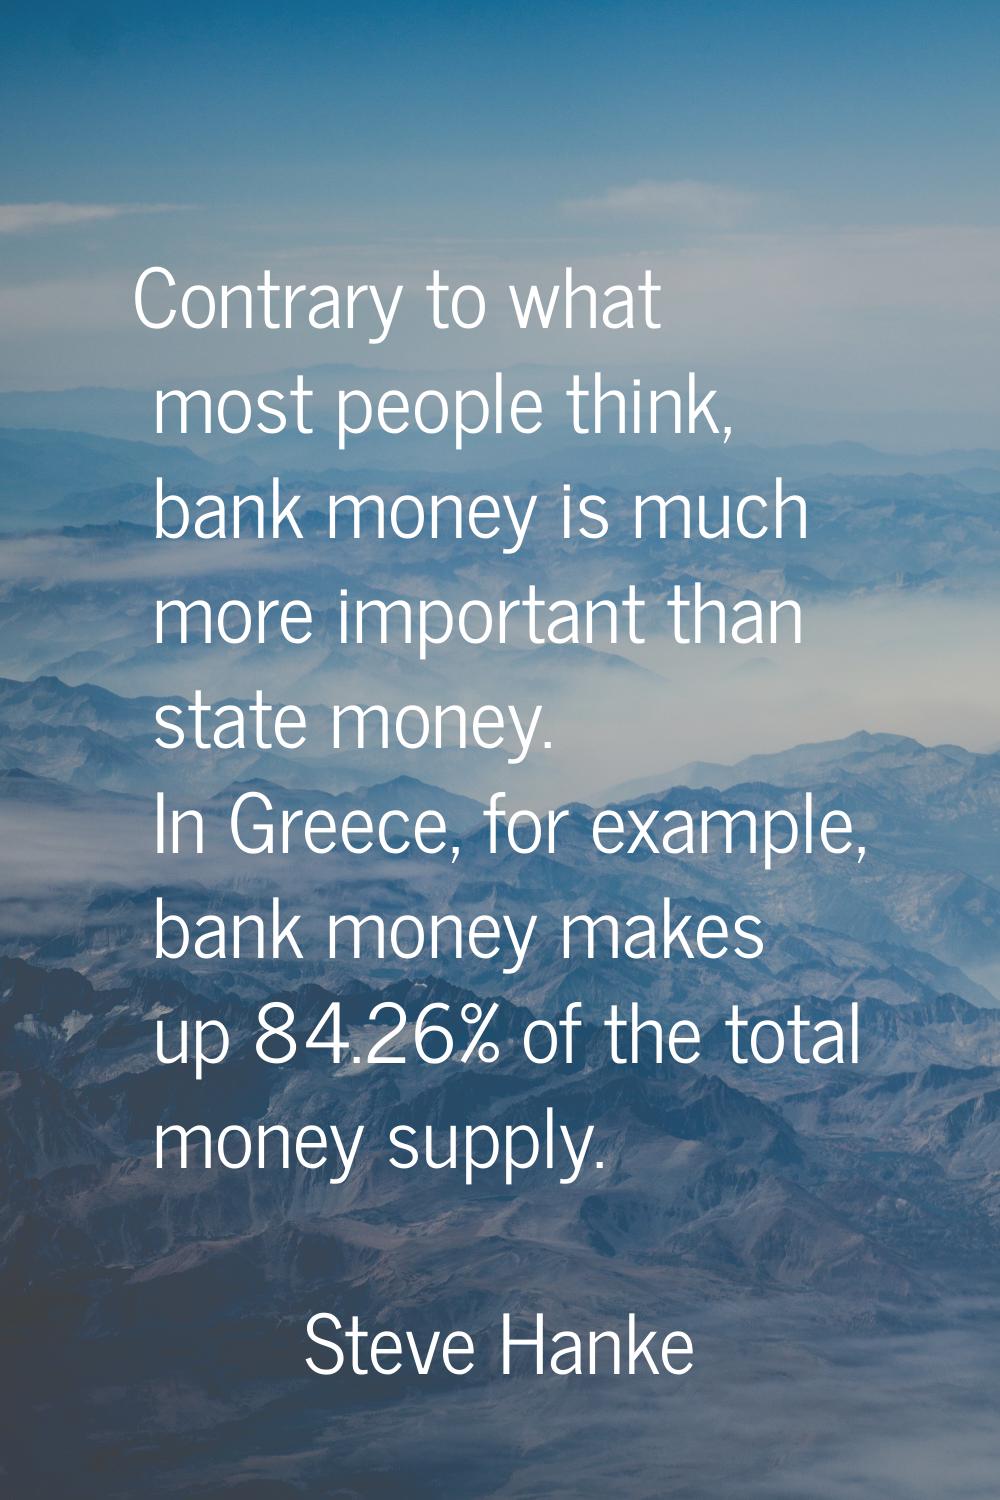 Contrary to what most people think, bank money is much more important than state money. In Greece, 